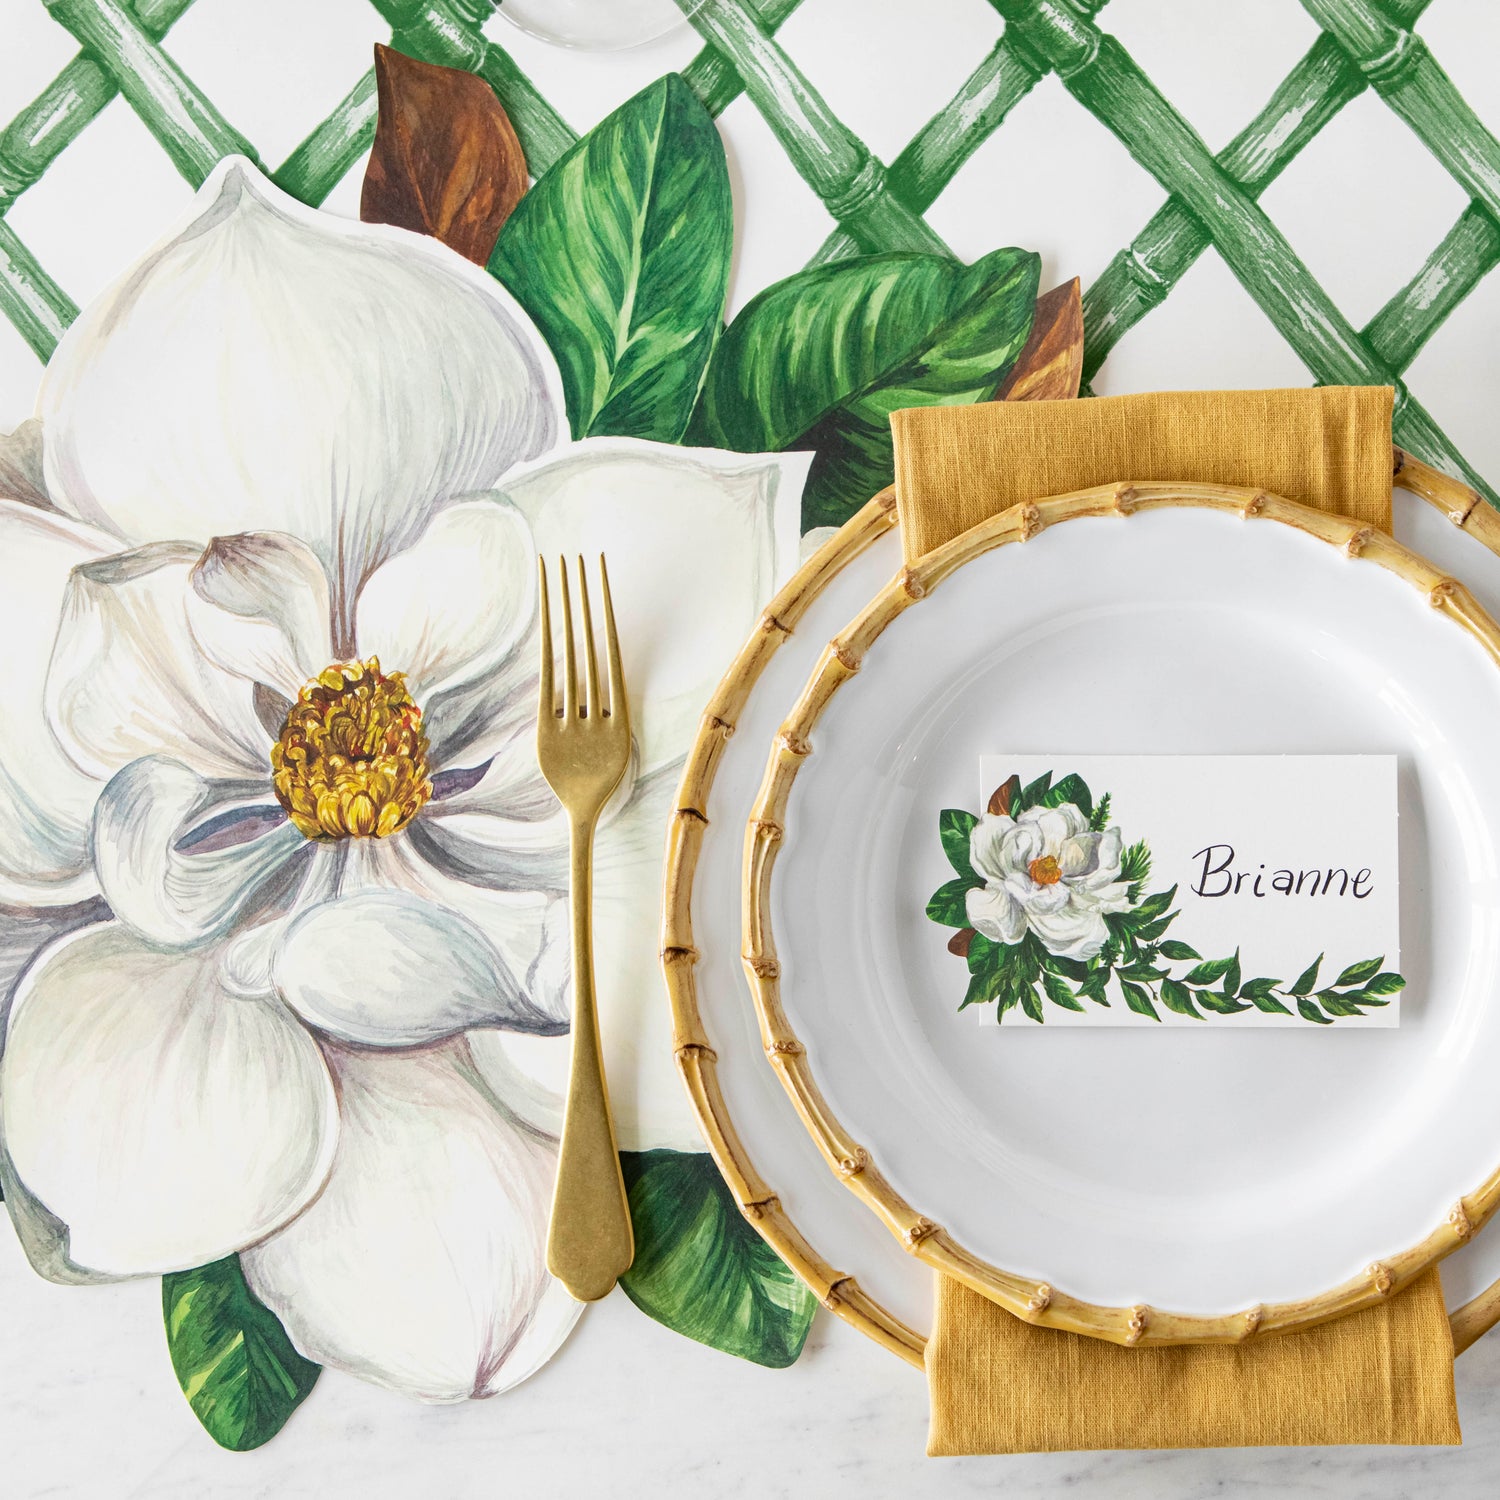 Green Lattice Placemats by Hester &amp; Cook are perfect for layering in the Magnolia garden.